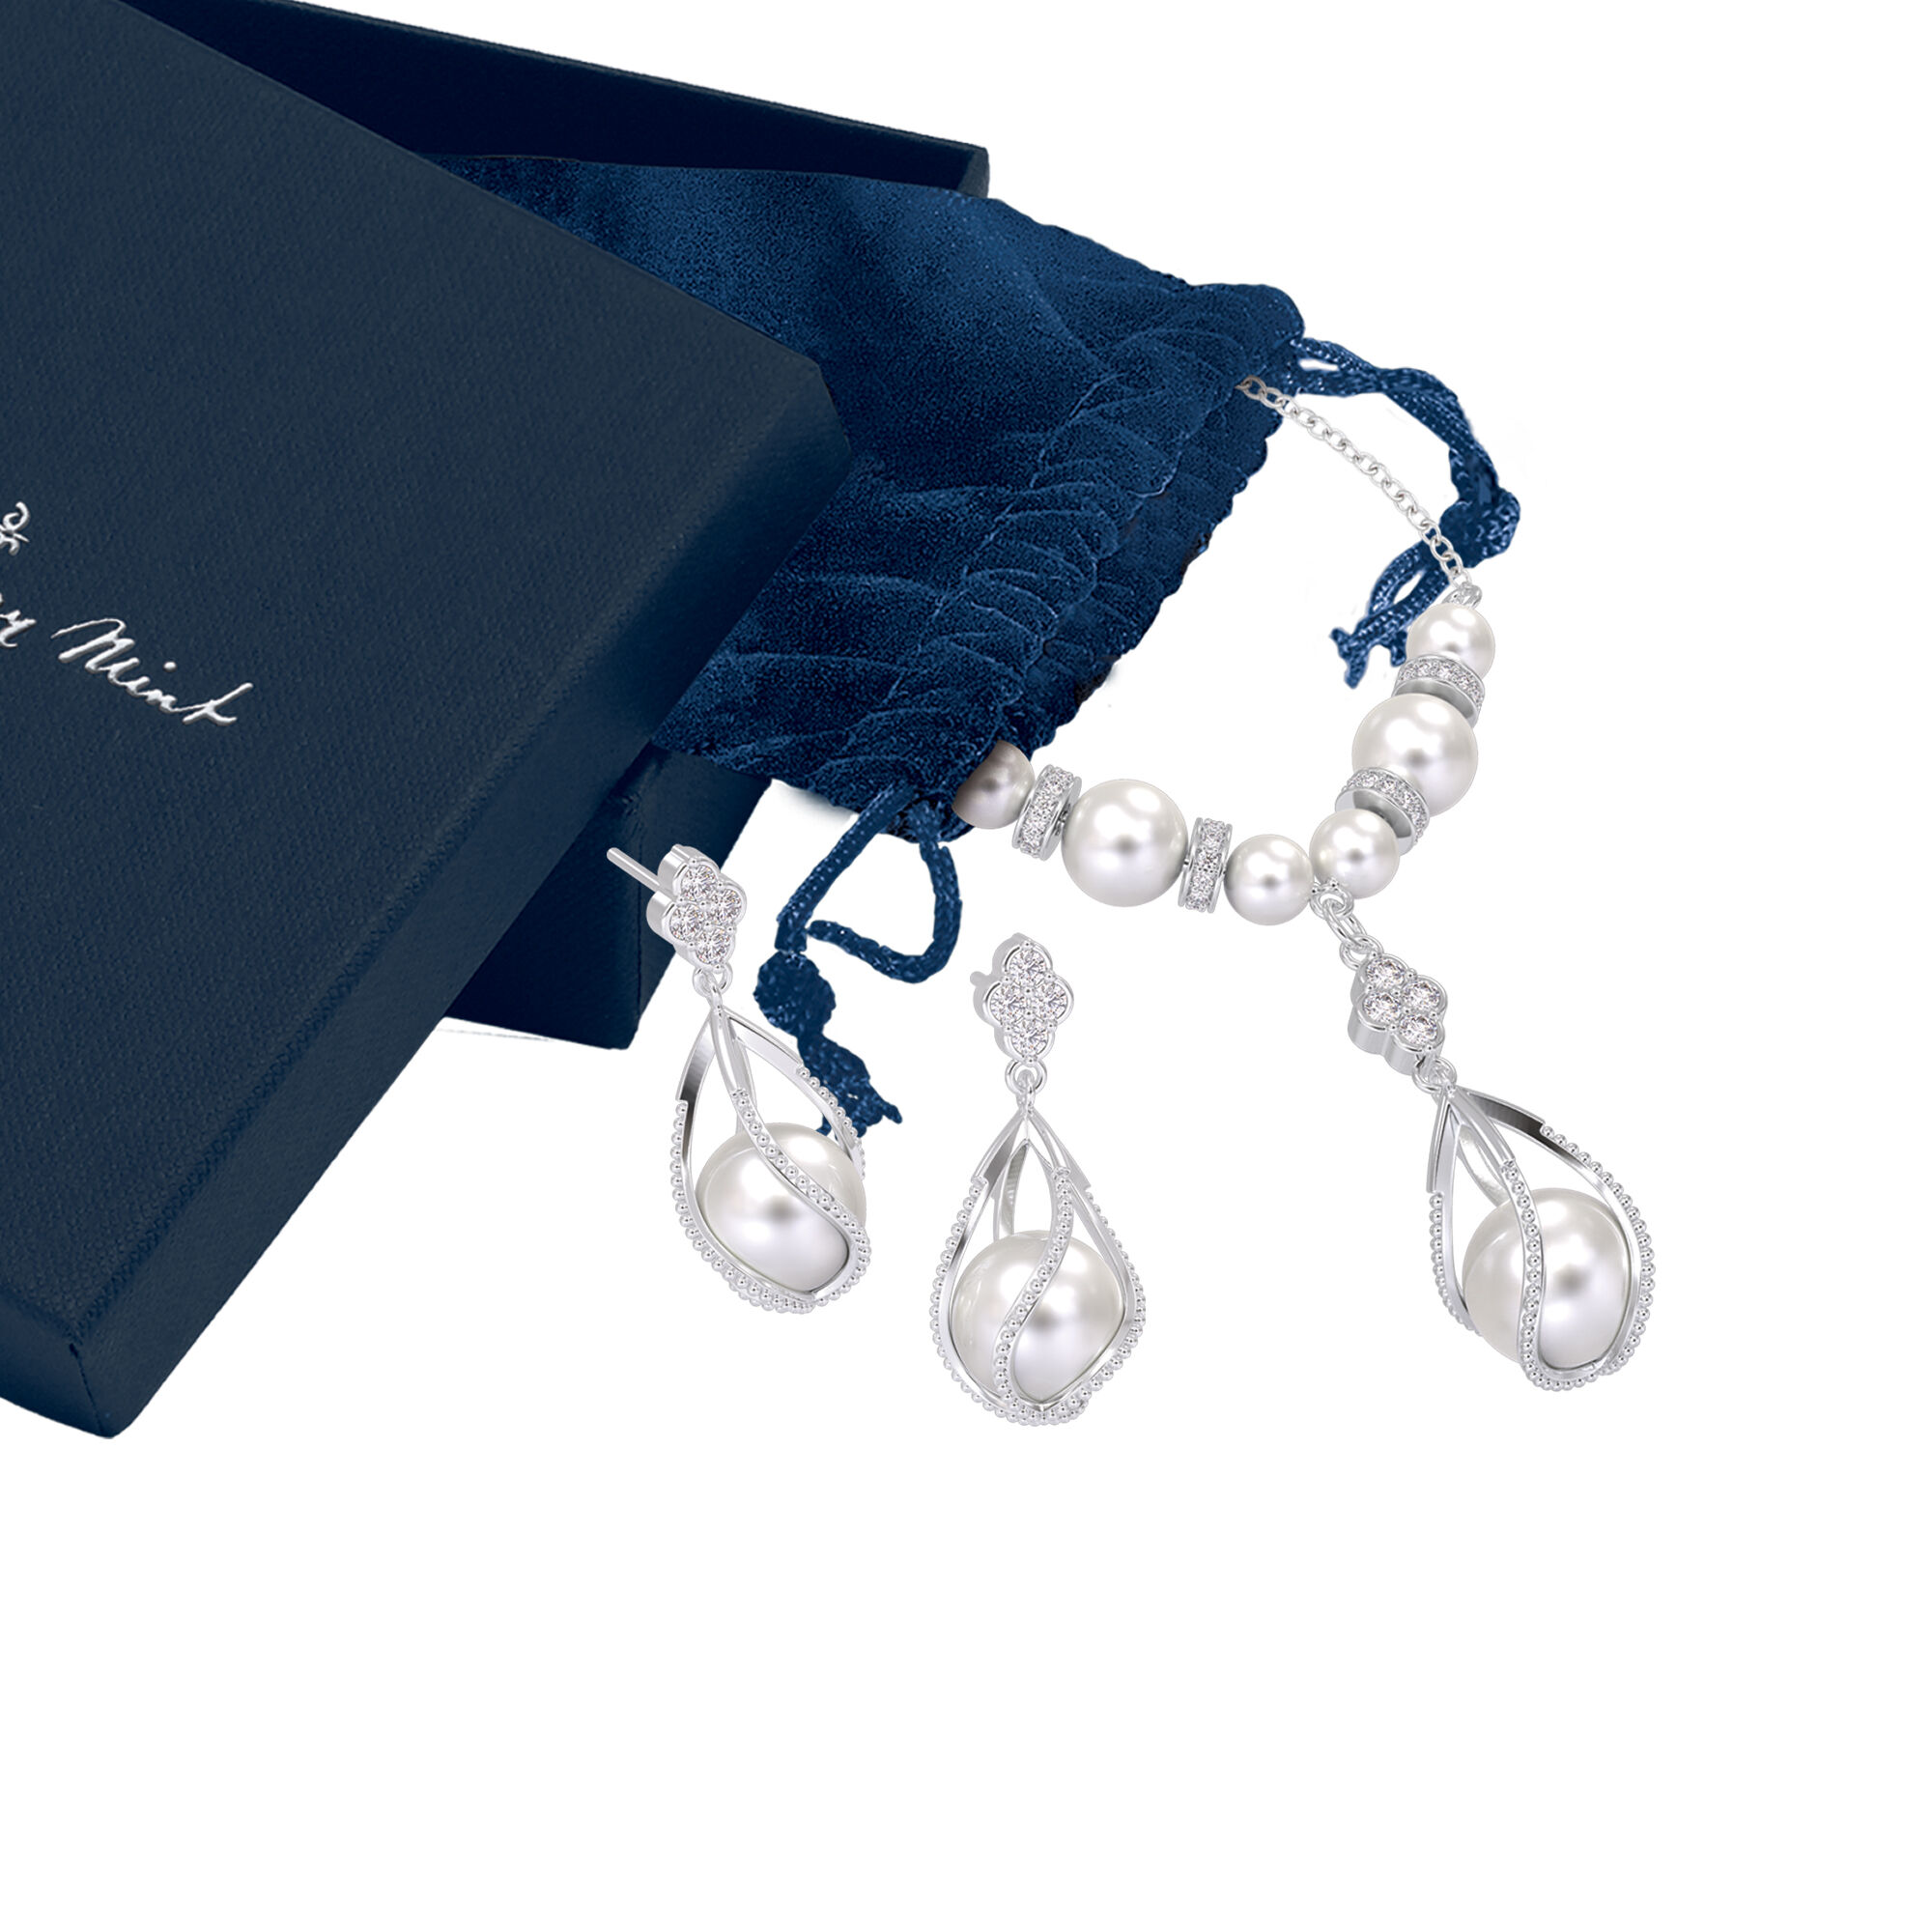 Embraced by Love Necklace and Earring Set 10573 0022 g gift pouchbox